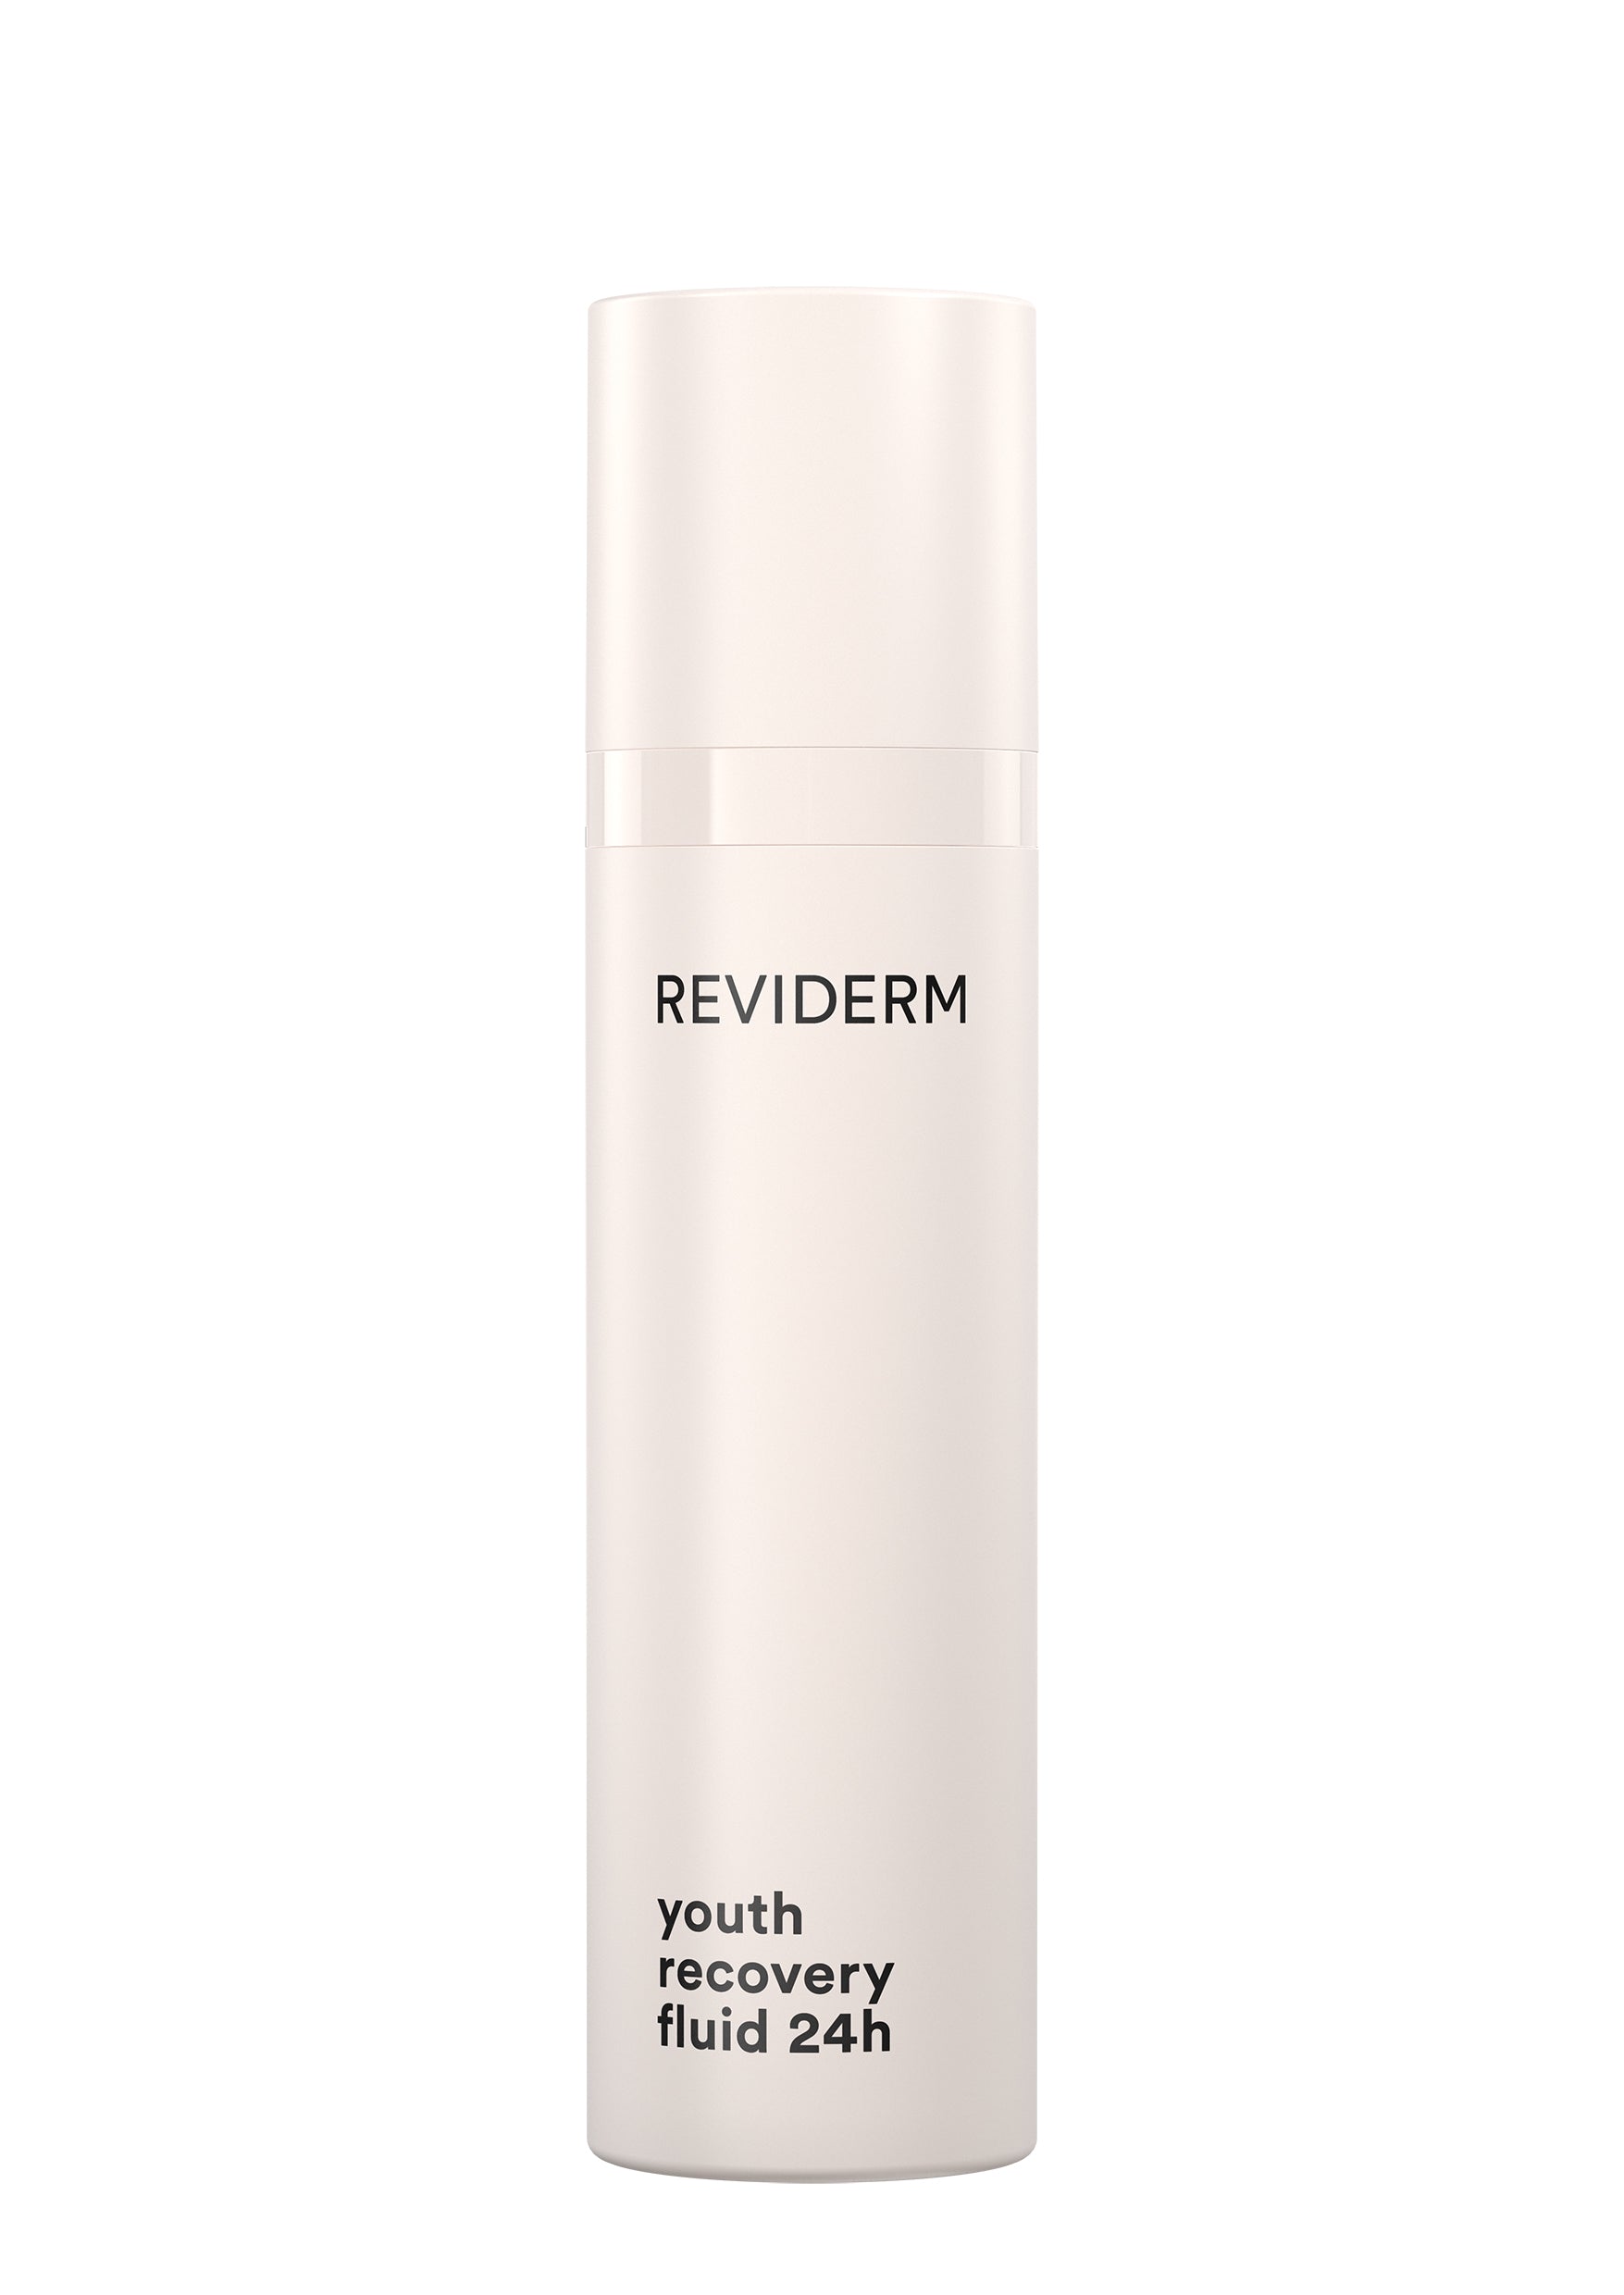 REVIDERM YOUTH RECOVERY FLUID 24H.